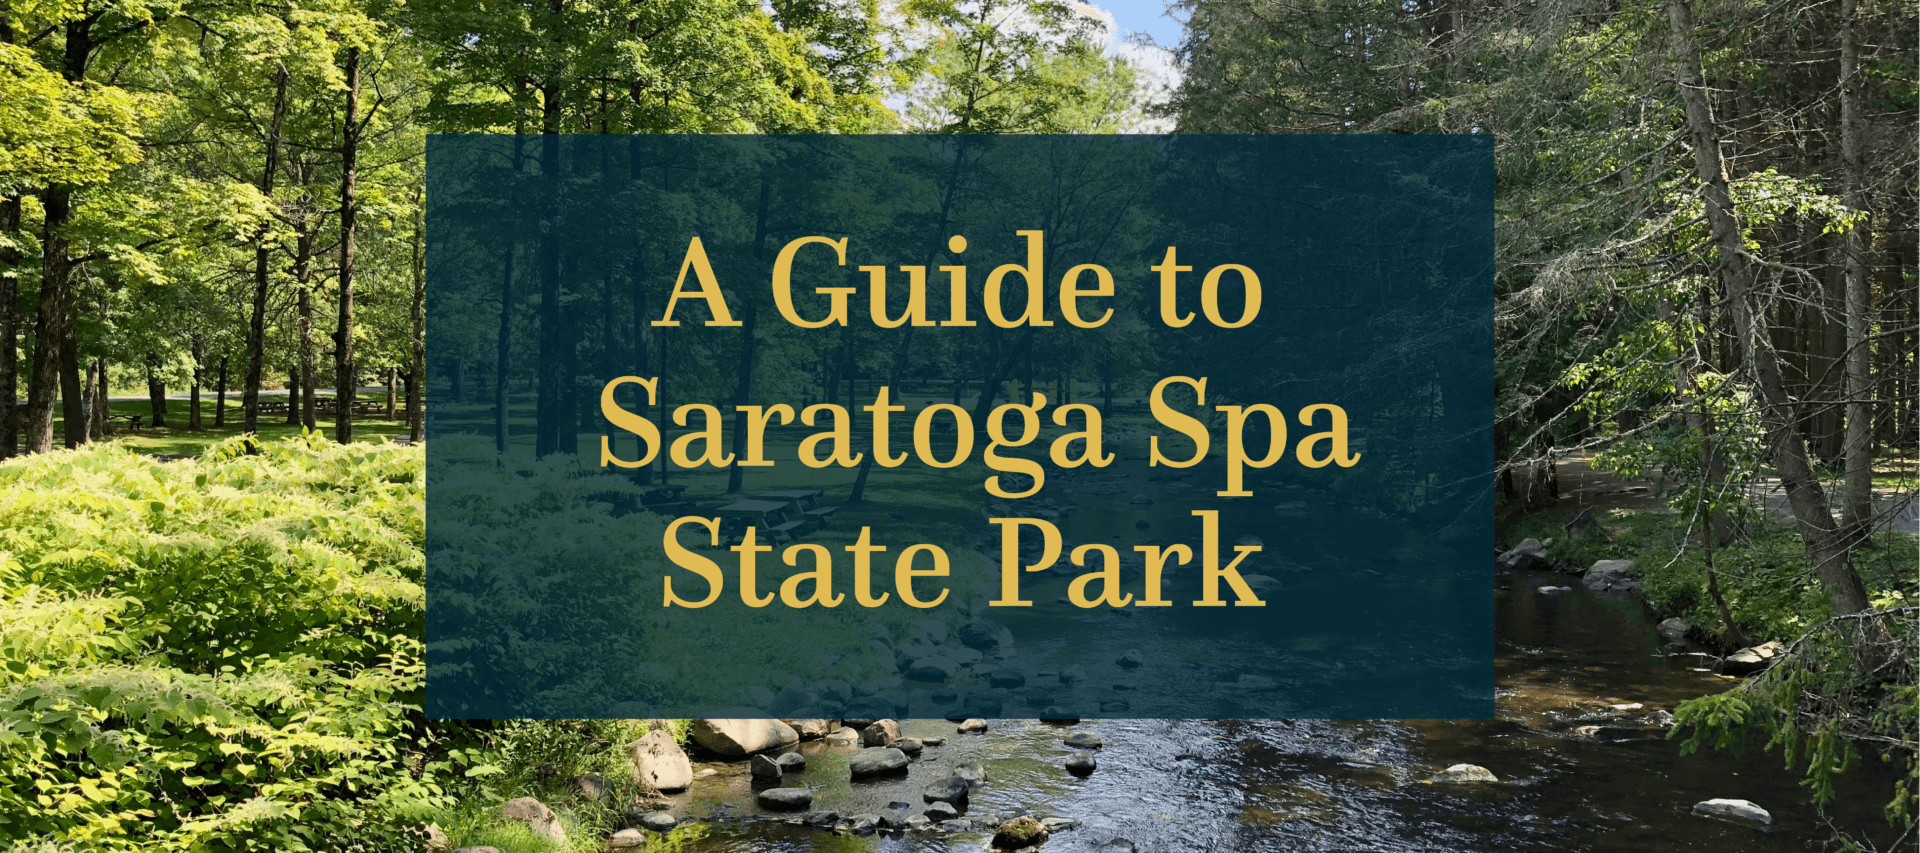 A Guide to Saratoga Spa State Park